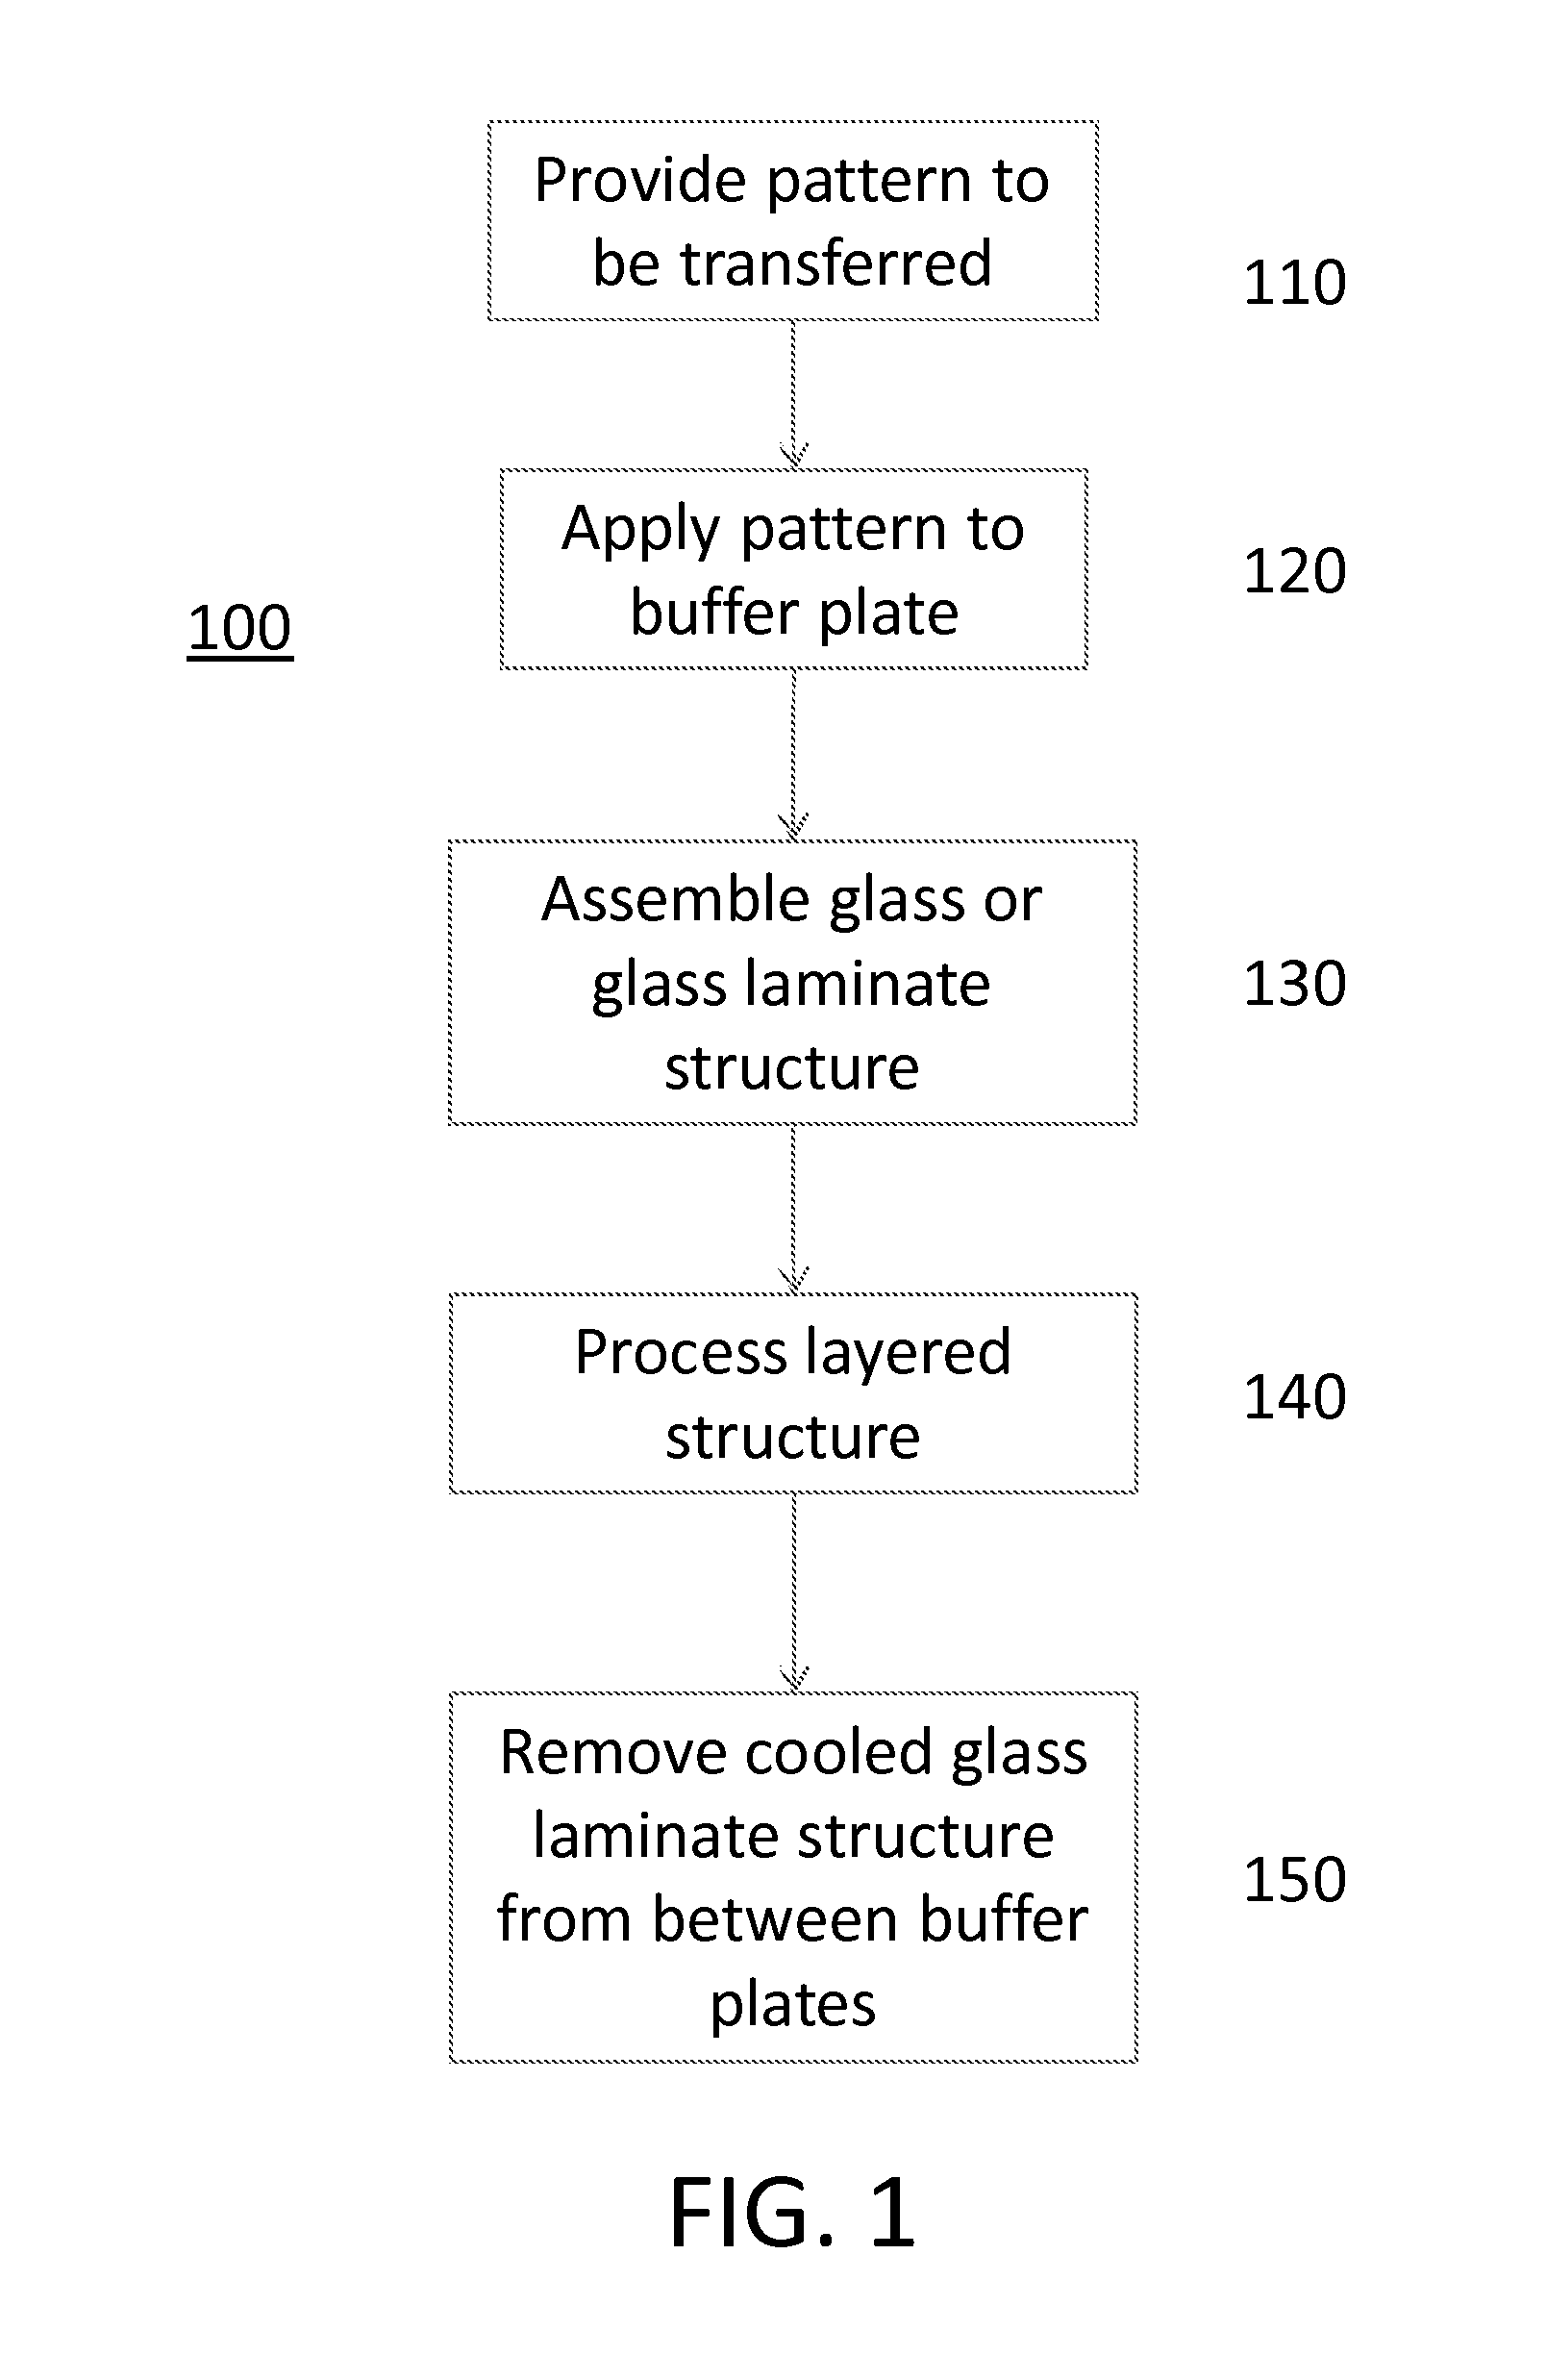 Methods for forming patterns in thin glass laminate structures